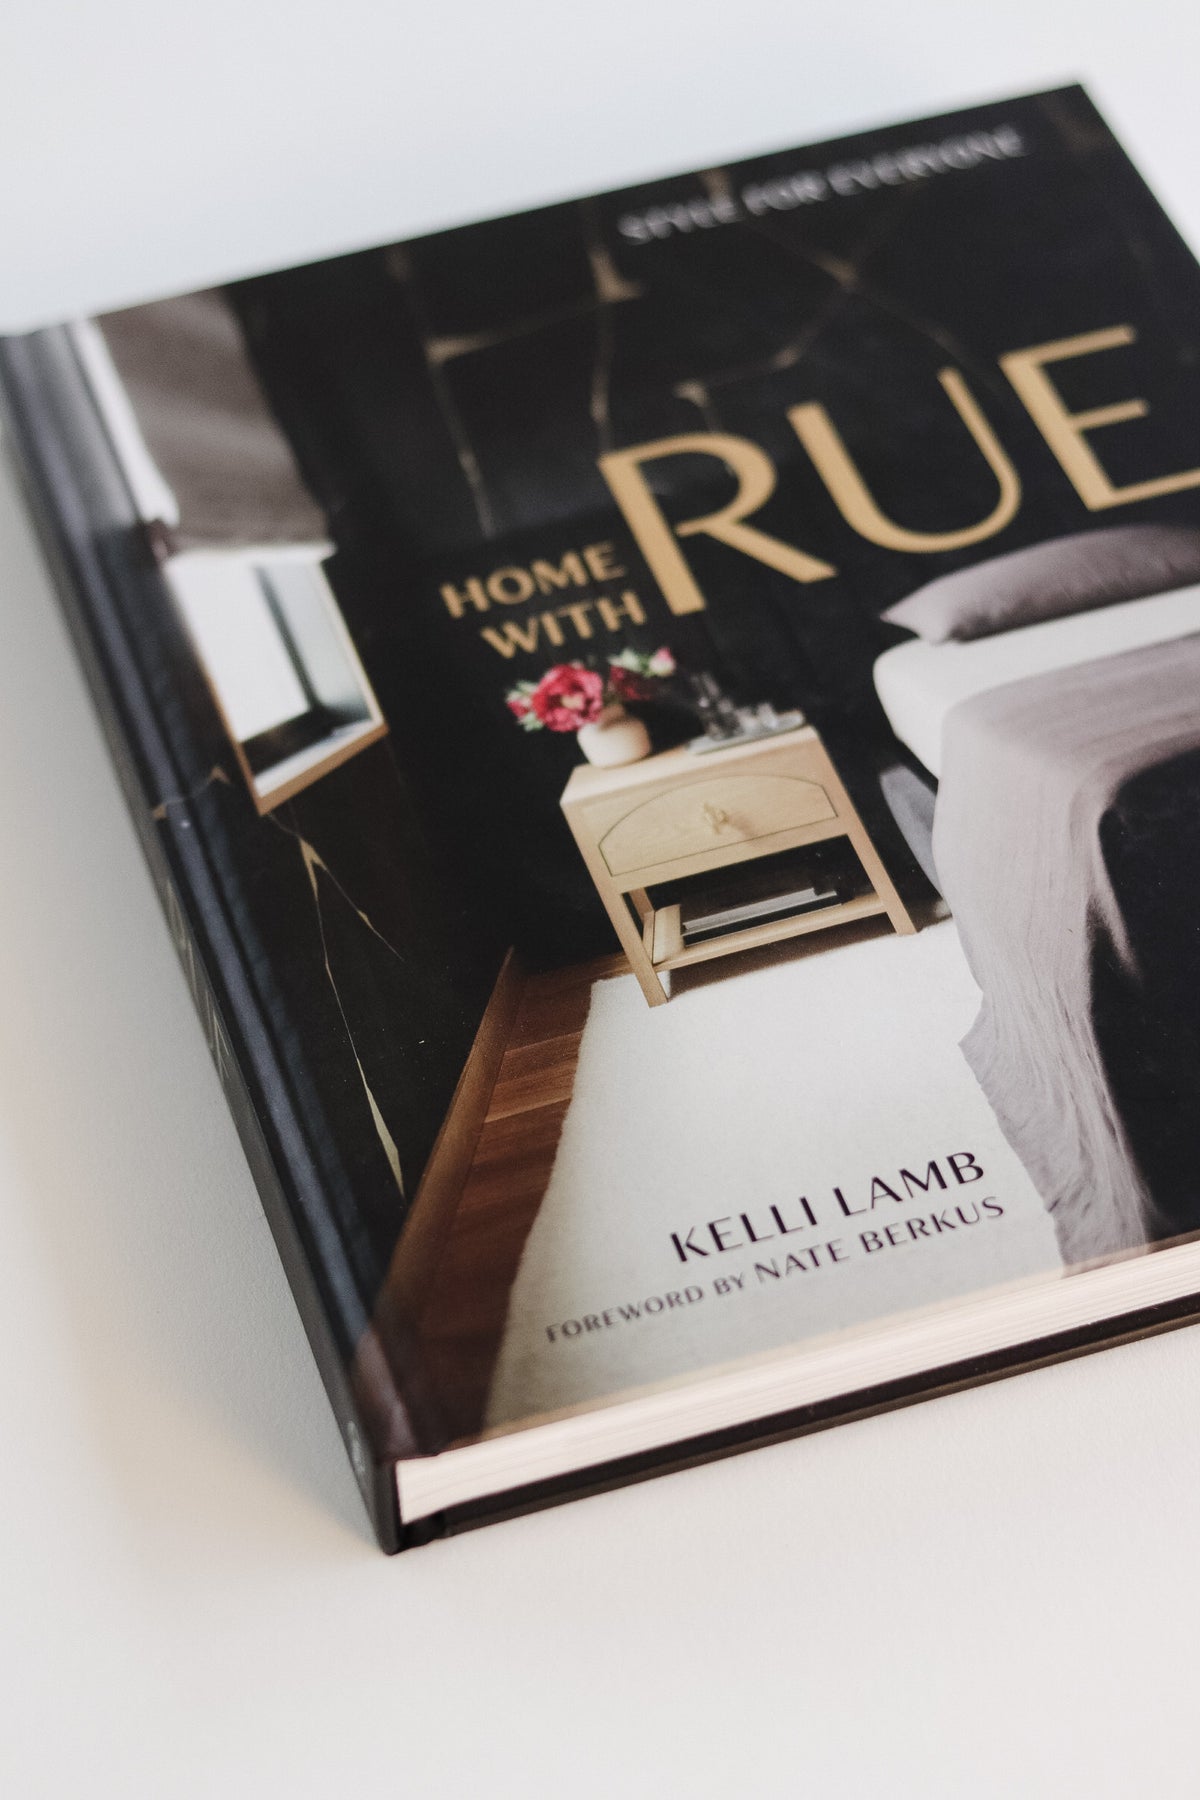 “Home With Rue” By Kelli Lamb